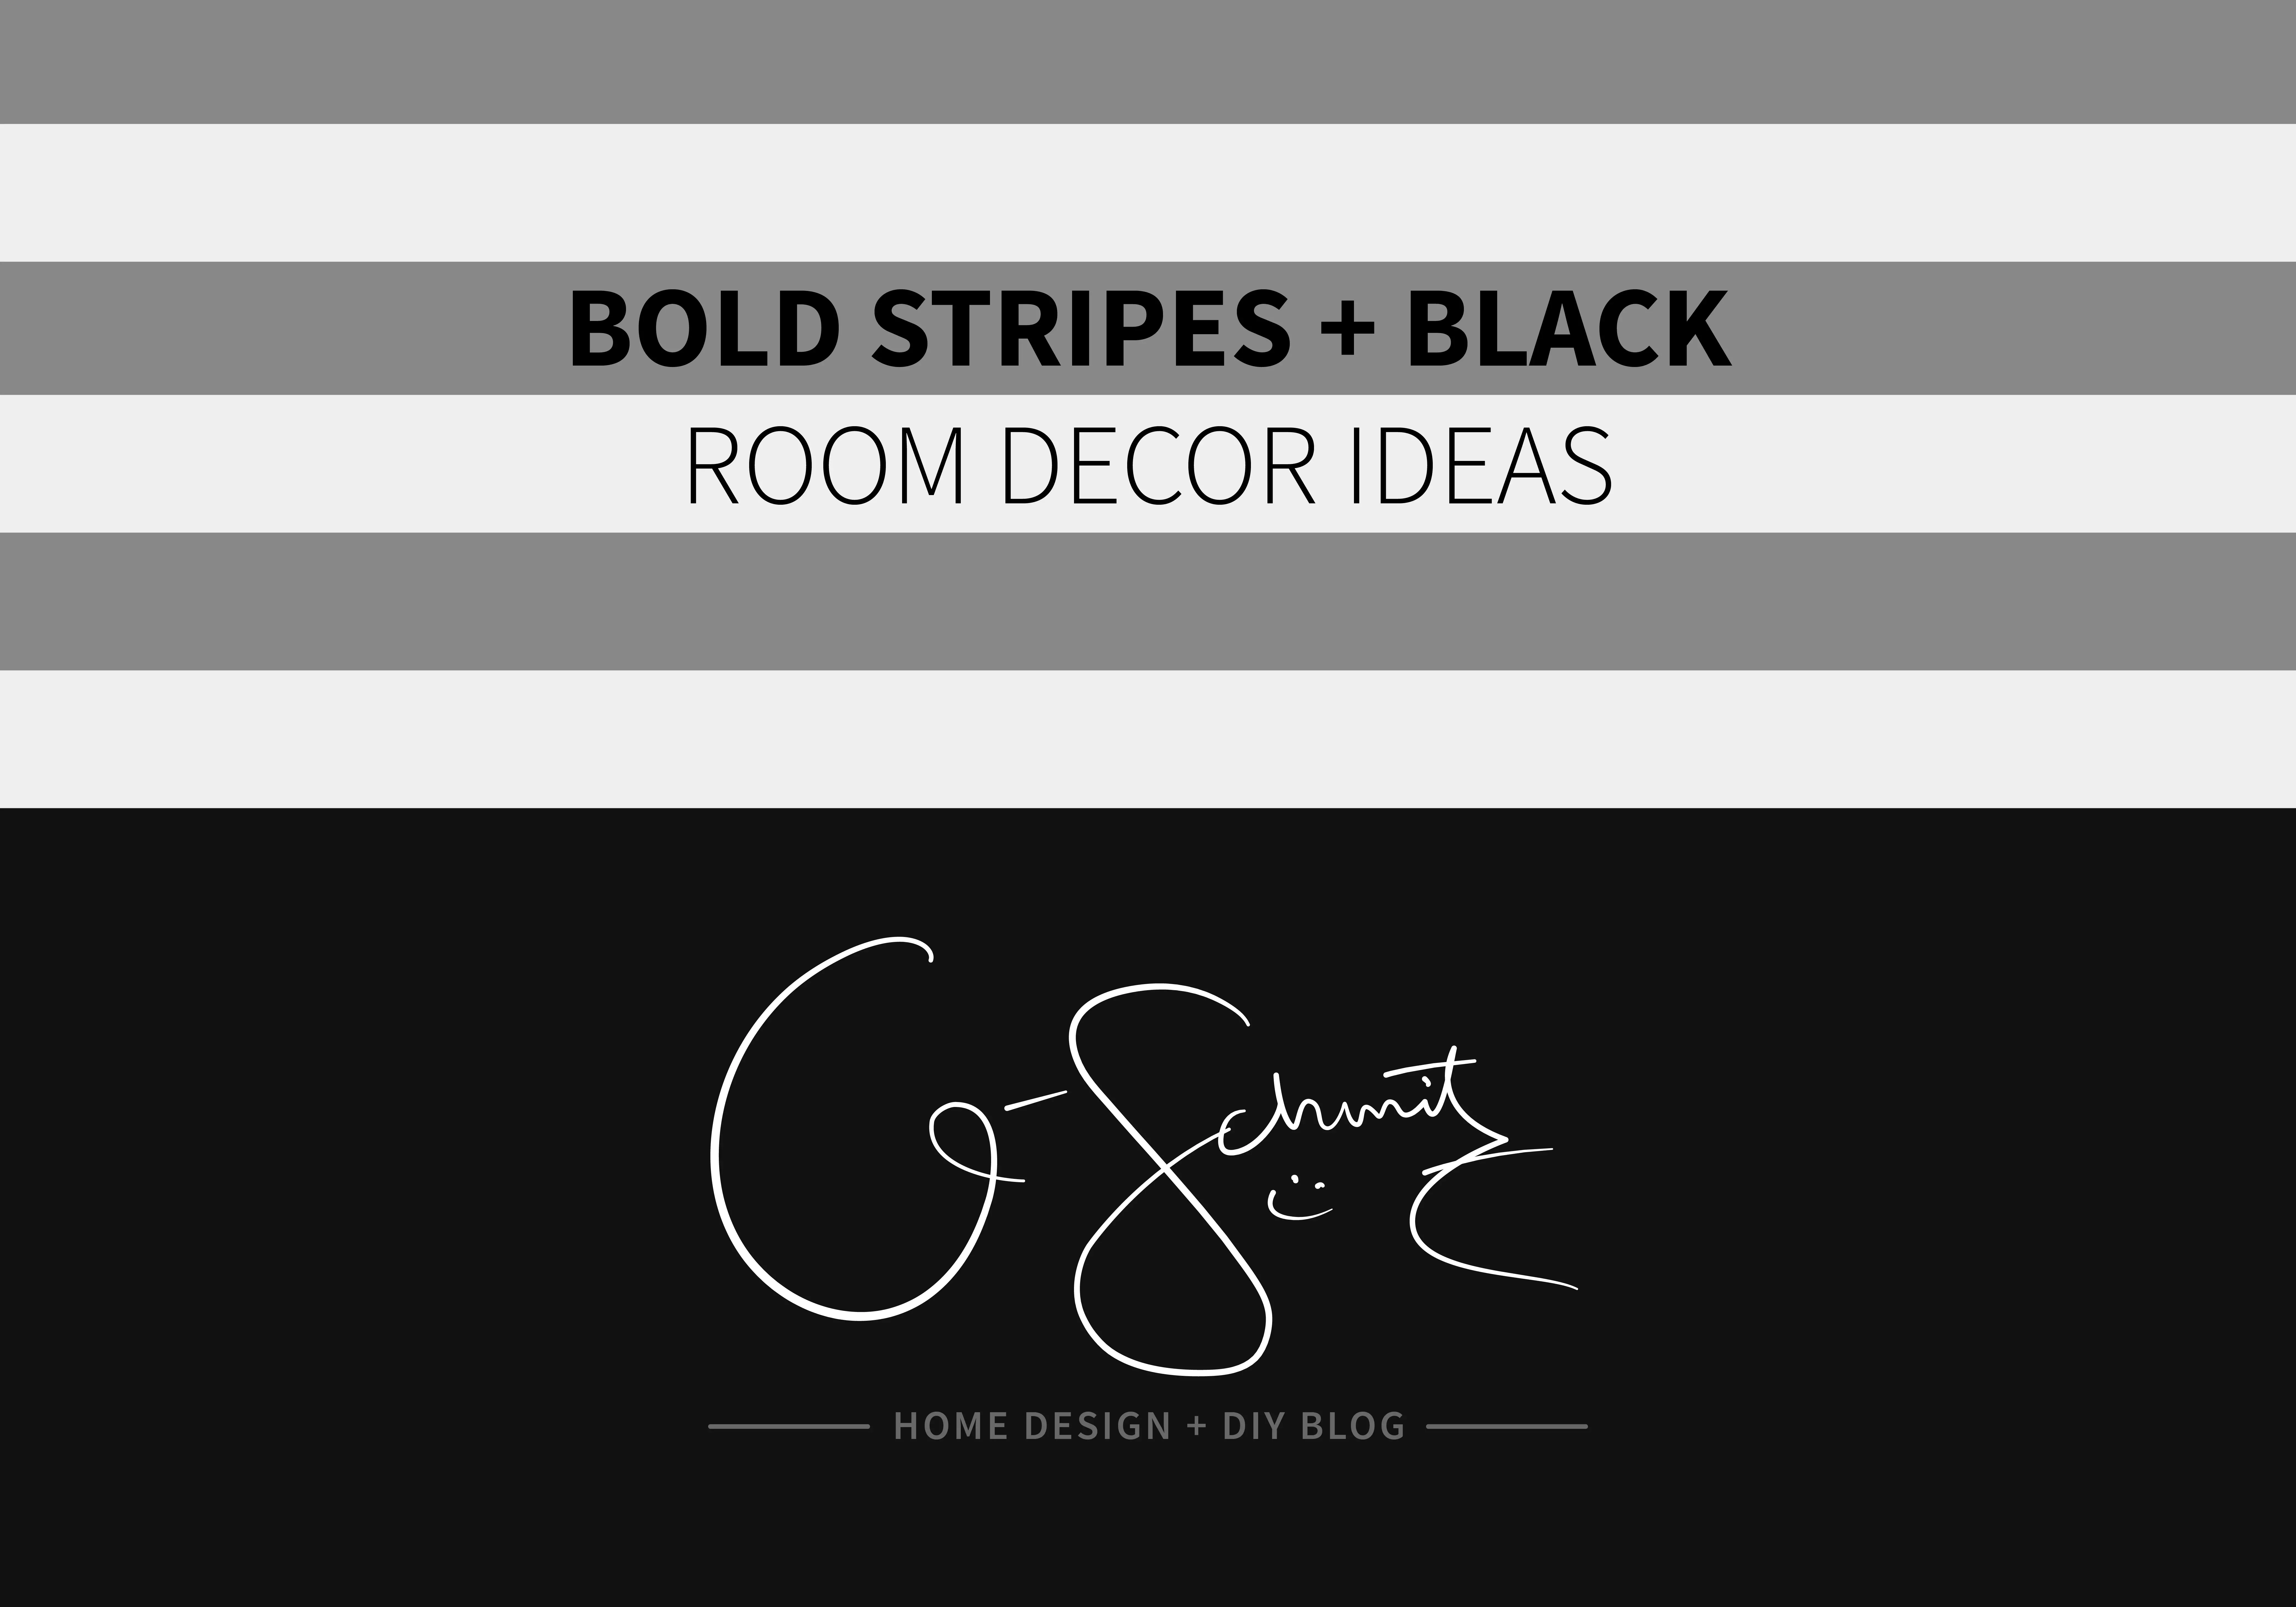 Bold stripes and black walls can be both sophisticated and fun, playful and serious – let’s look at accessories and décor options in three rooms where these fun walls can be painted.